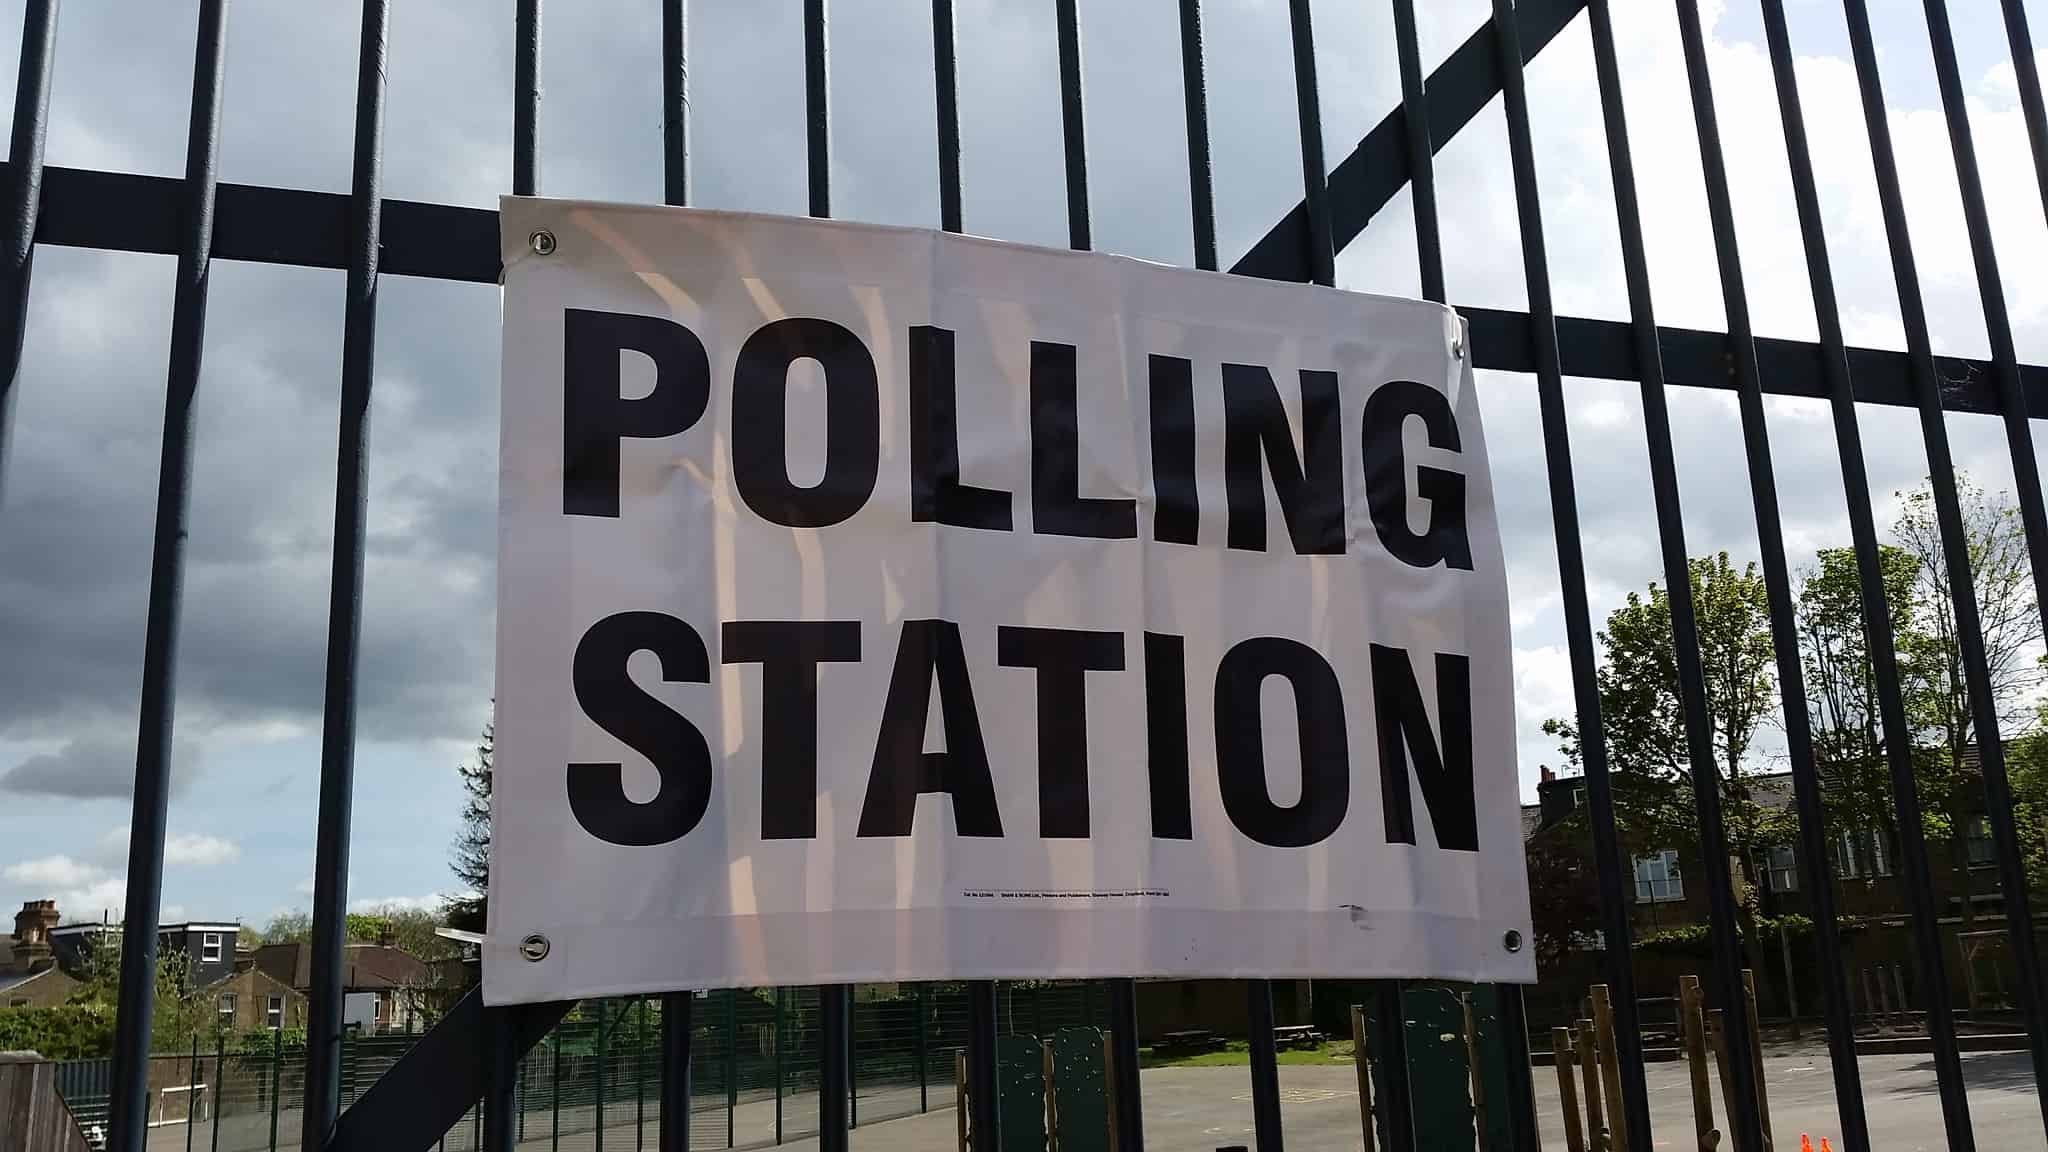 Polling station sign on railings